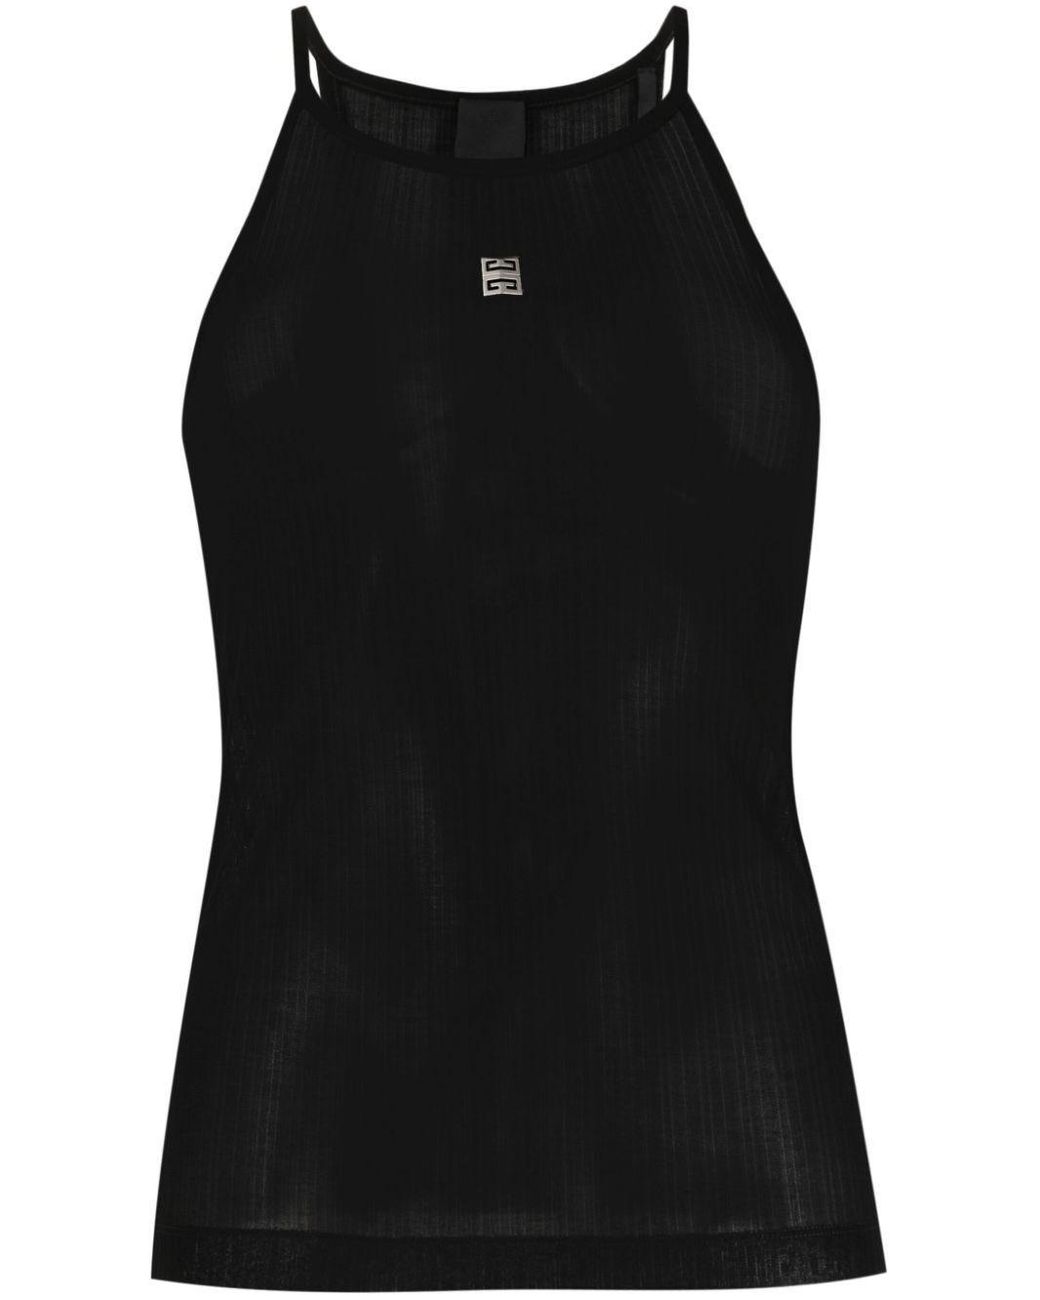 Givenchy Fitted Tank Top in Black | Lyst UK